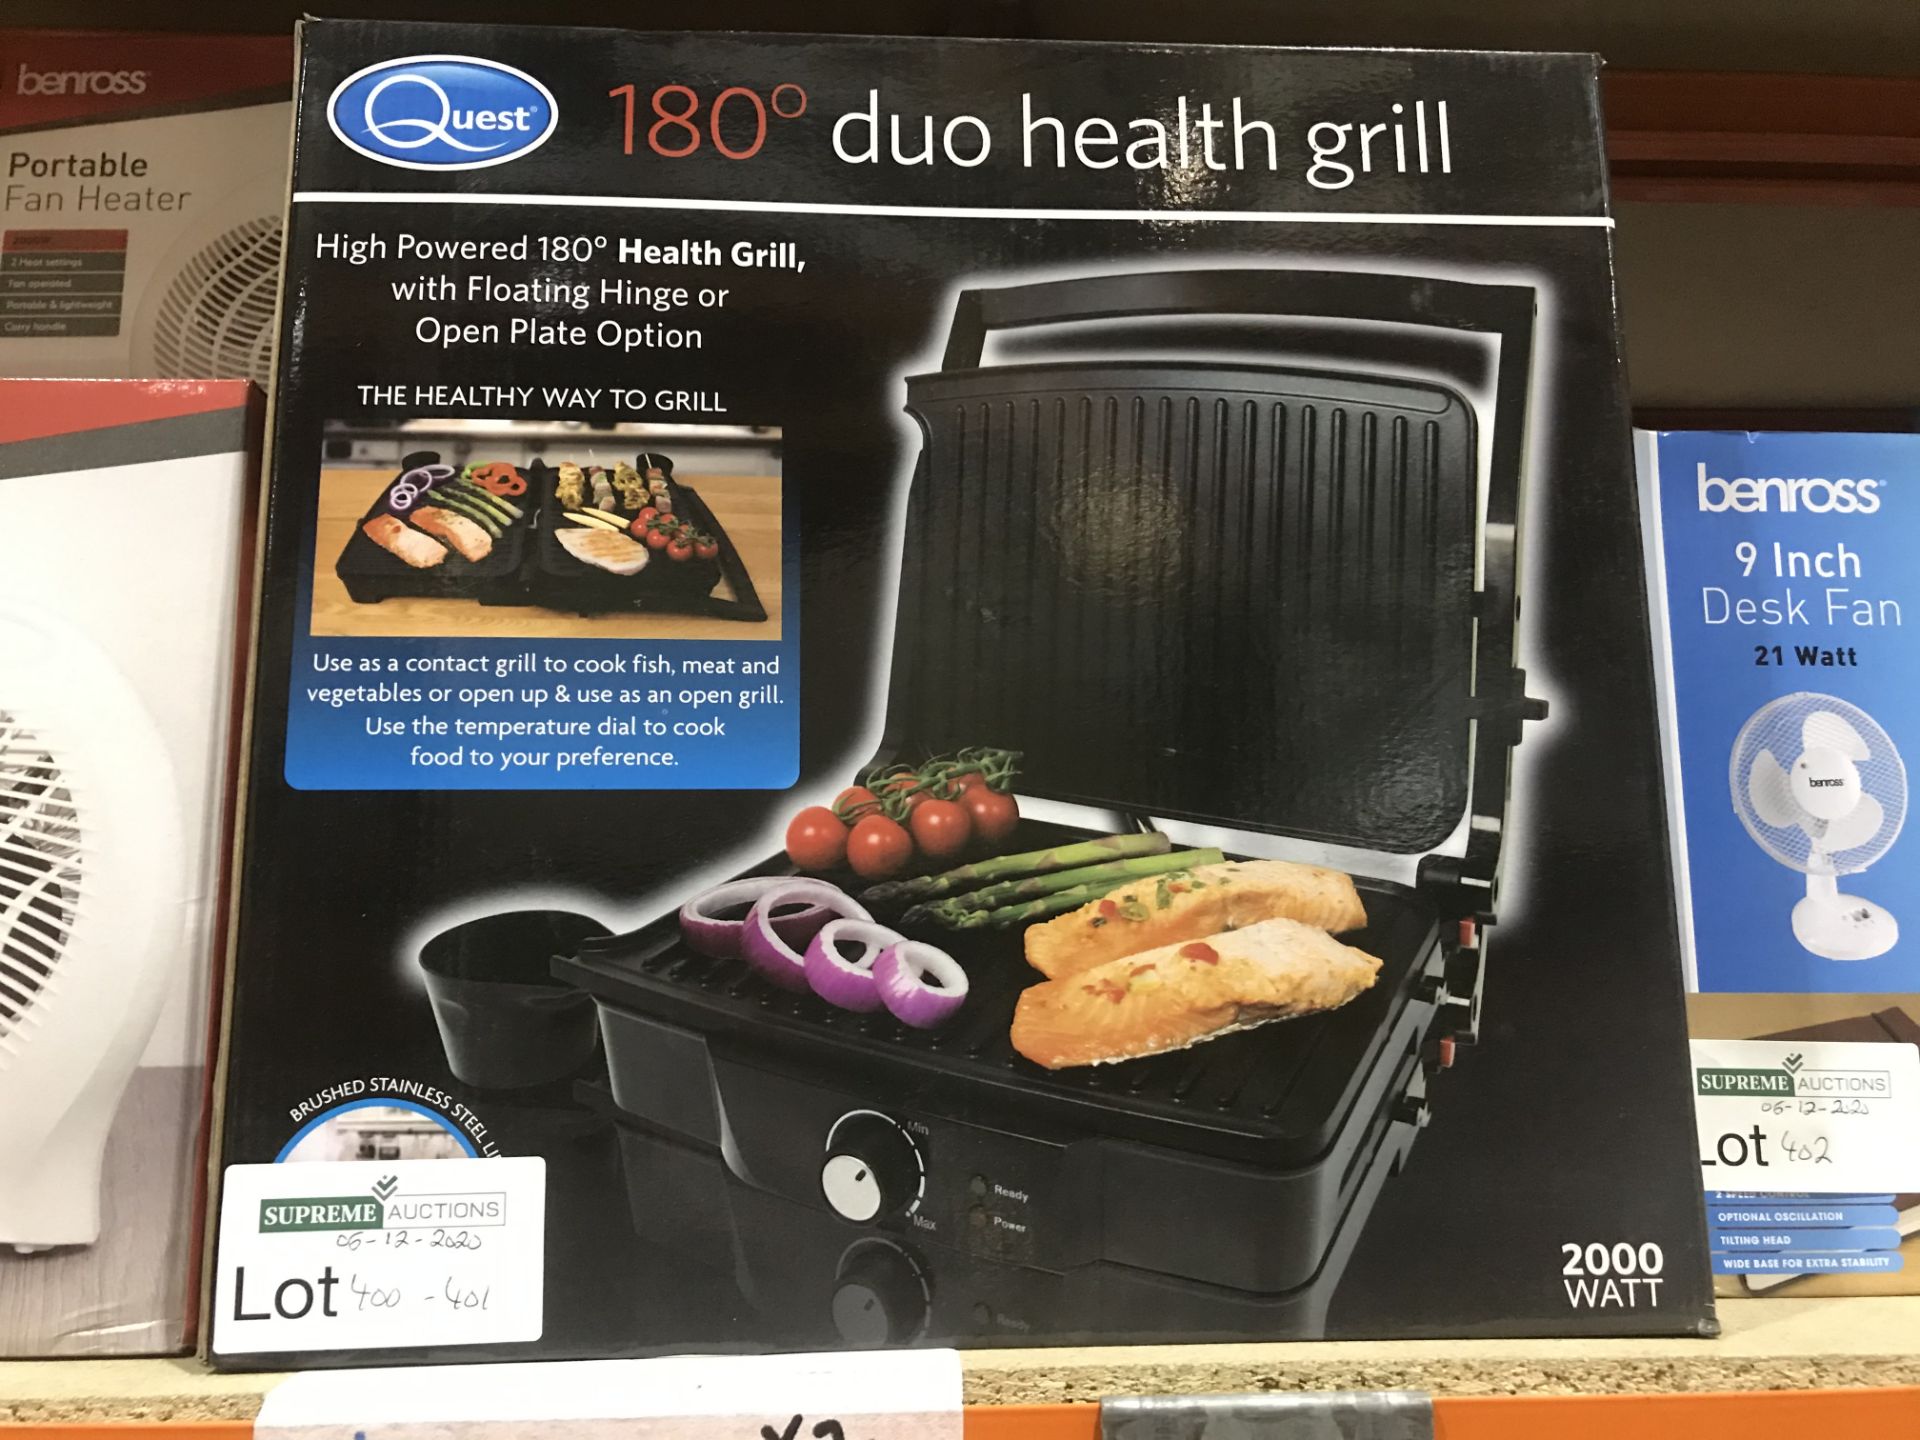 QUEST 180 DUO HEALTH GRILL